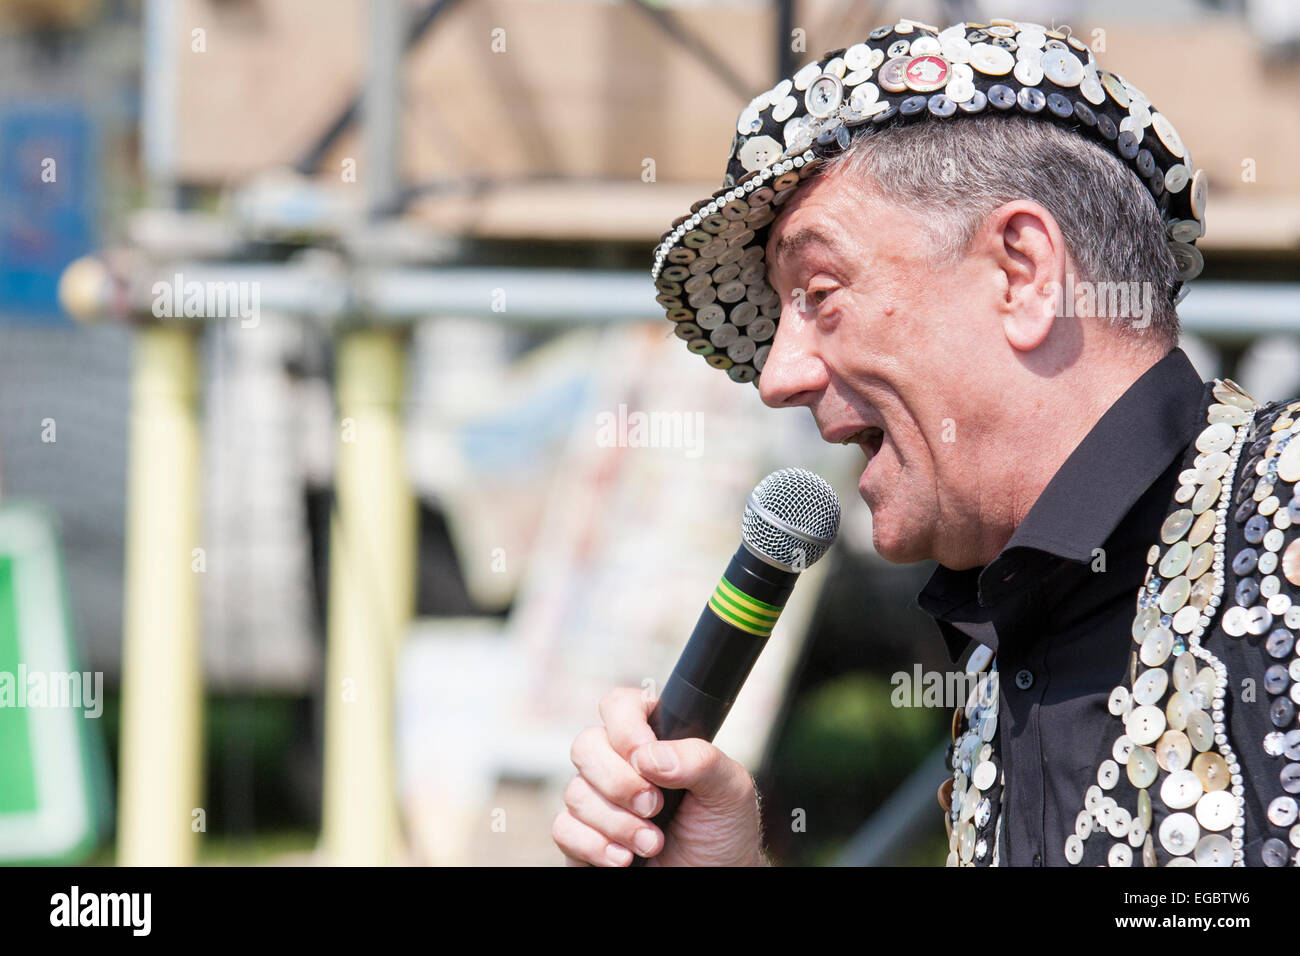 Mickie Driver, dressed in a pearly King waistcoat, jacket and hat, singing at an outdoor 1940s nostalgic event with hand held microphone. Stock Photo